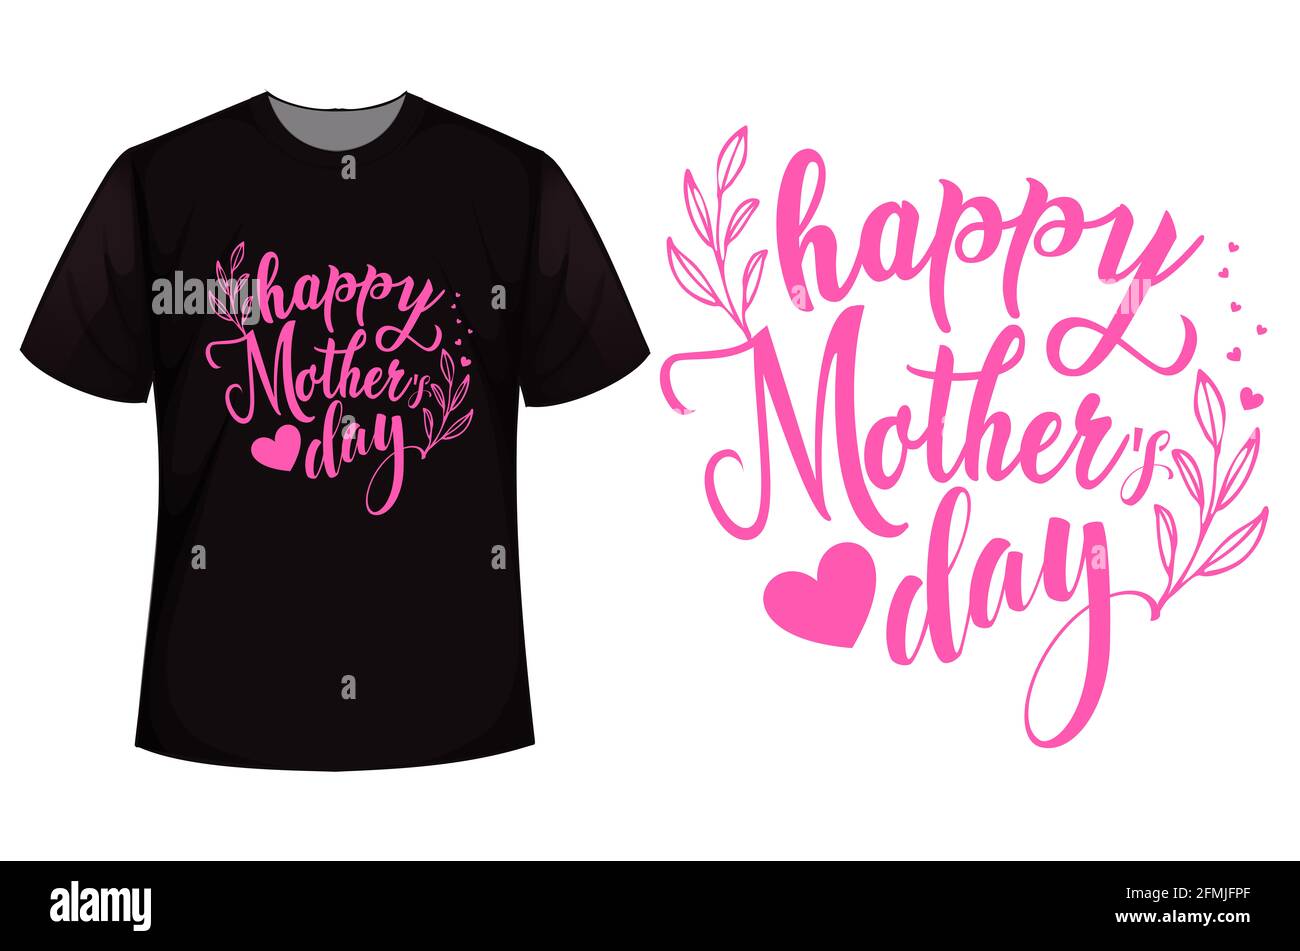 happy mother's day t-shirt design internazionale mother's day vettoriale design Foto Stock